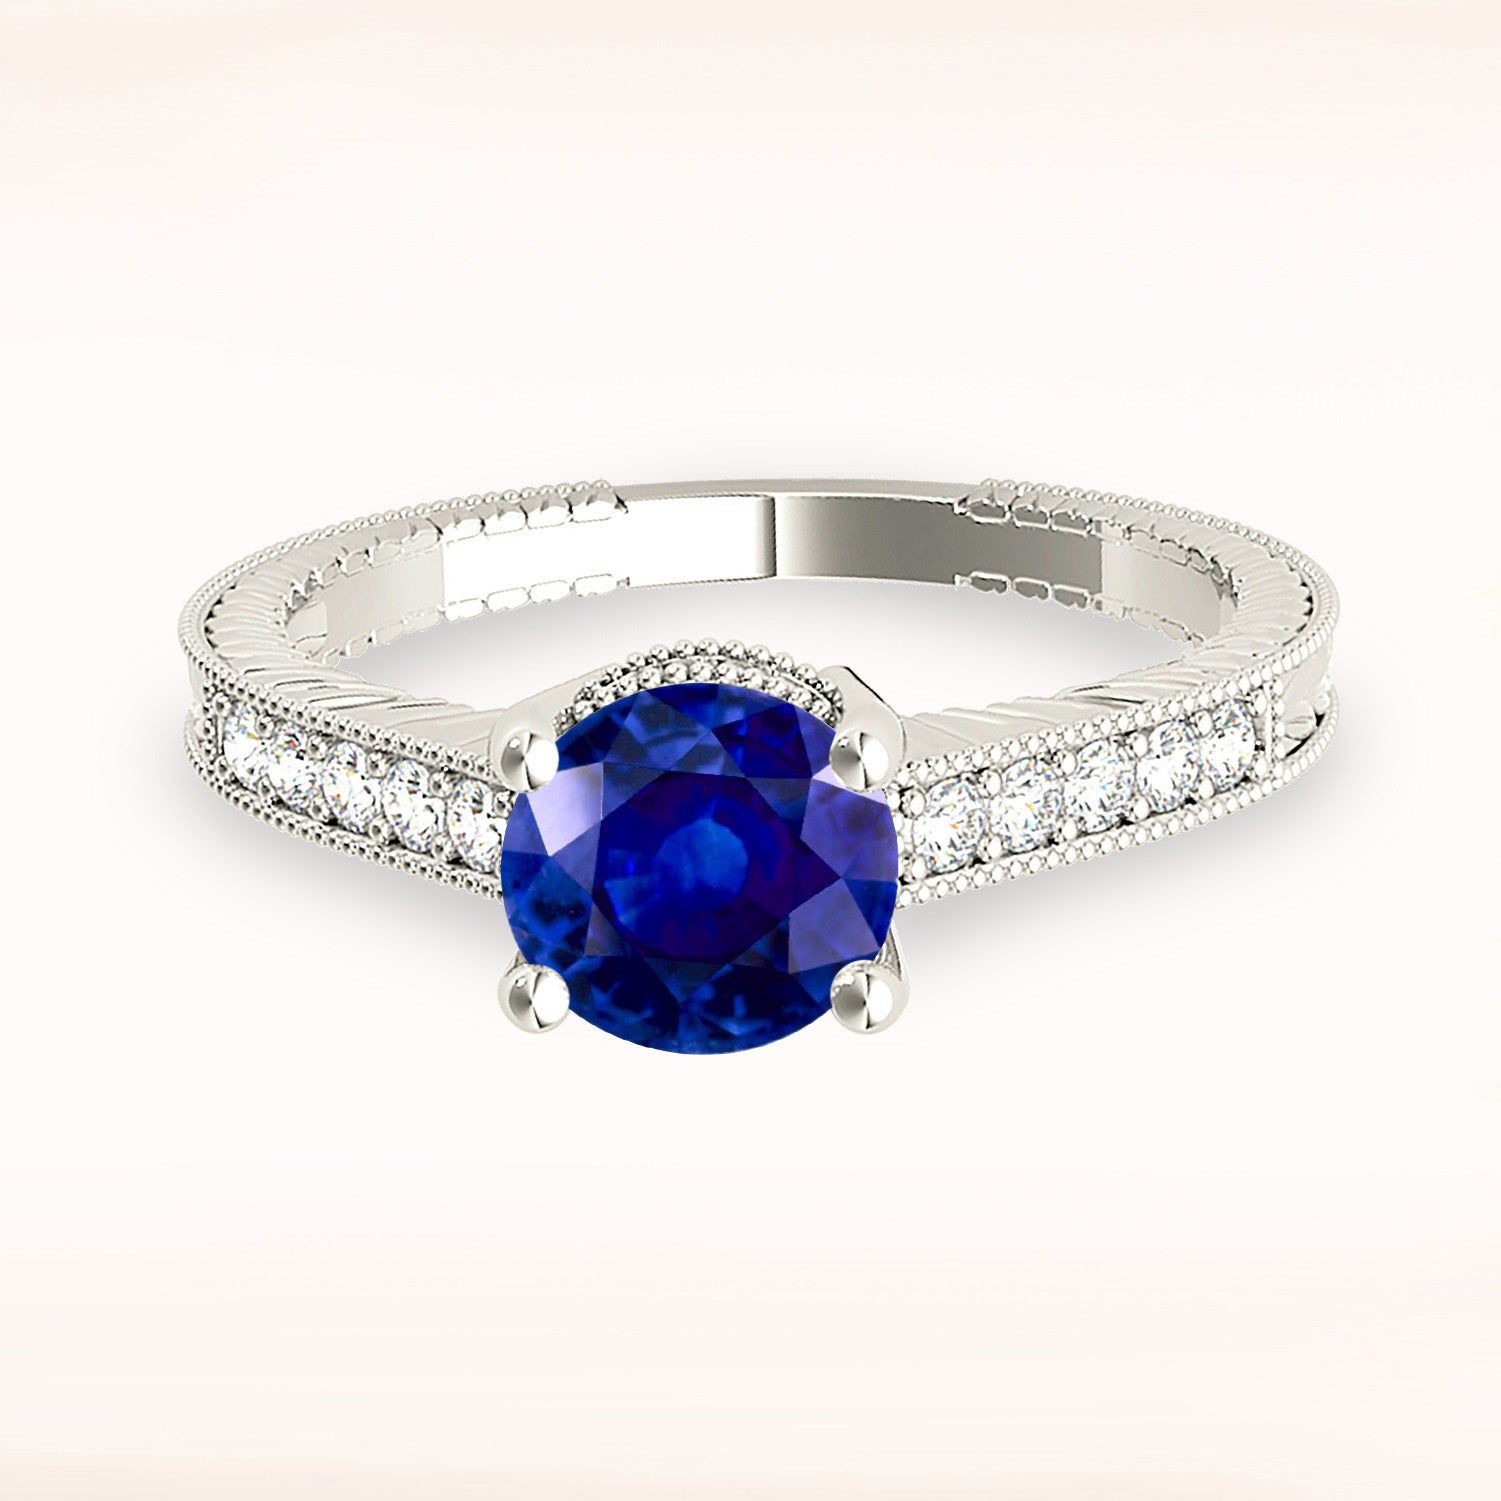 1.80 ct. Genuine Blue Sapphire Milgrain Vintage Ring With 0.20 ctw. Side Diamonds-in 14K/18K White, Yellow, Rose Gold and Platinum - Christmas Jewelry Gift -VIRABYANI